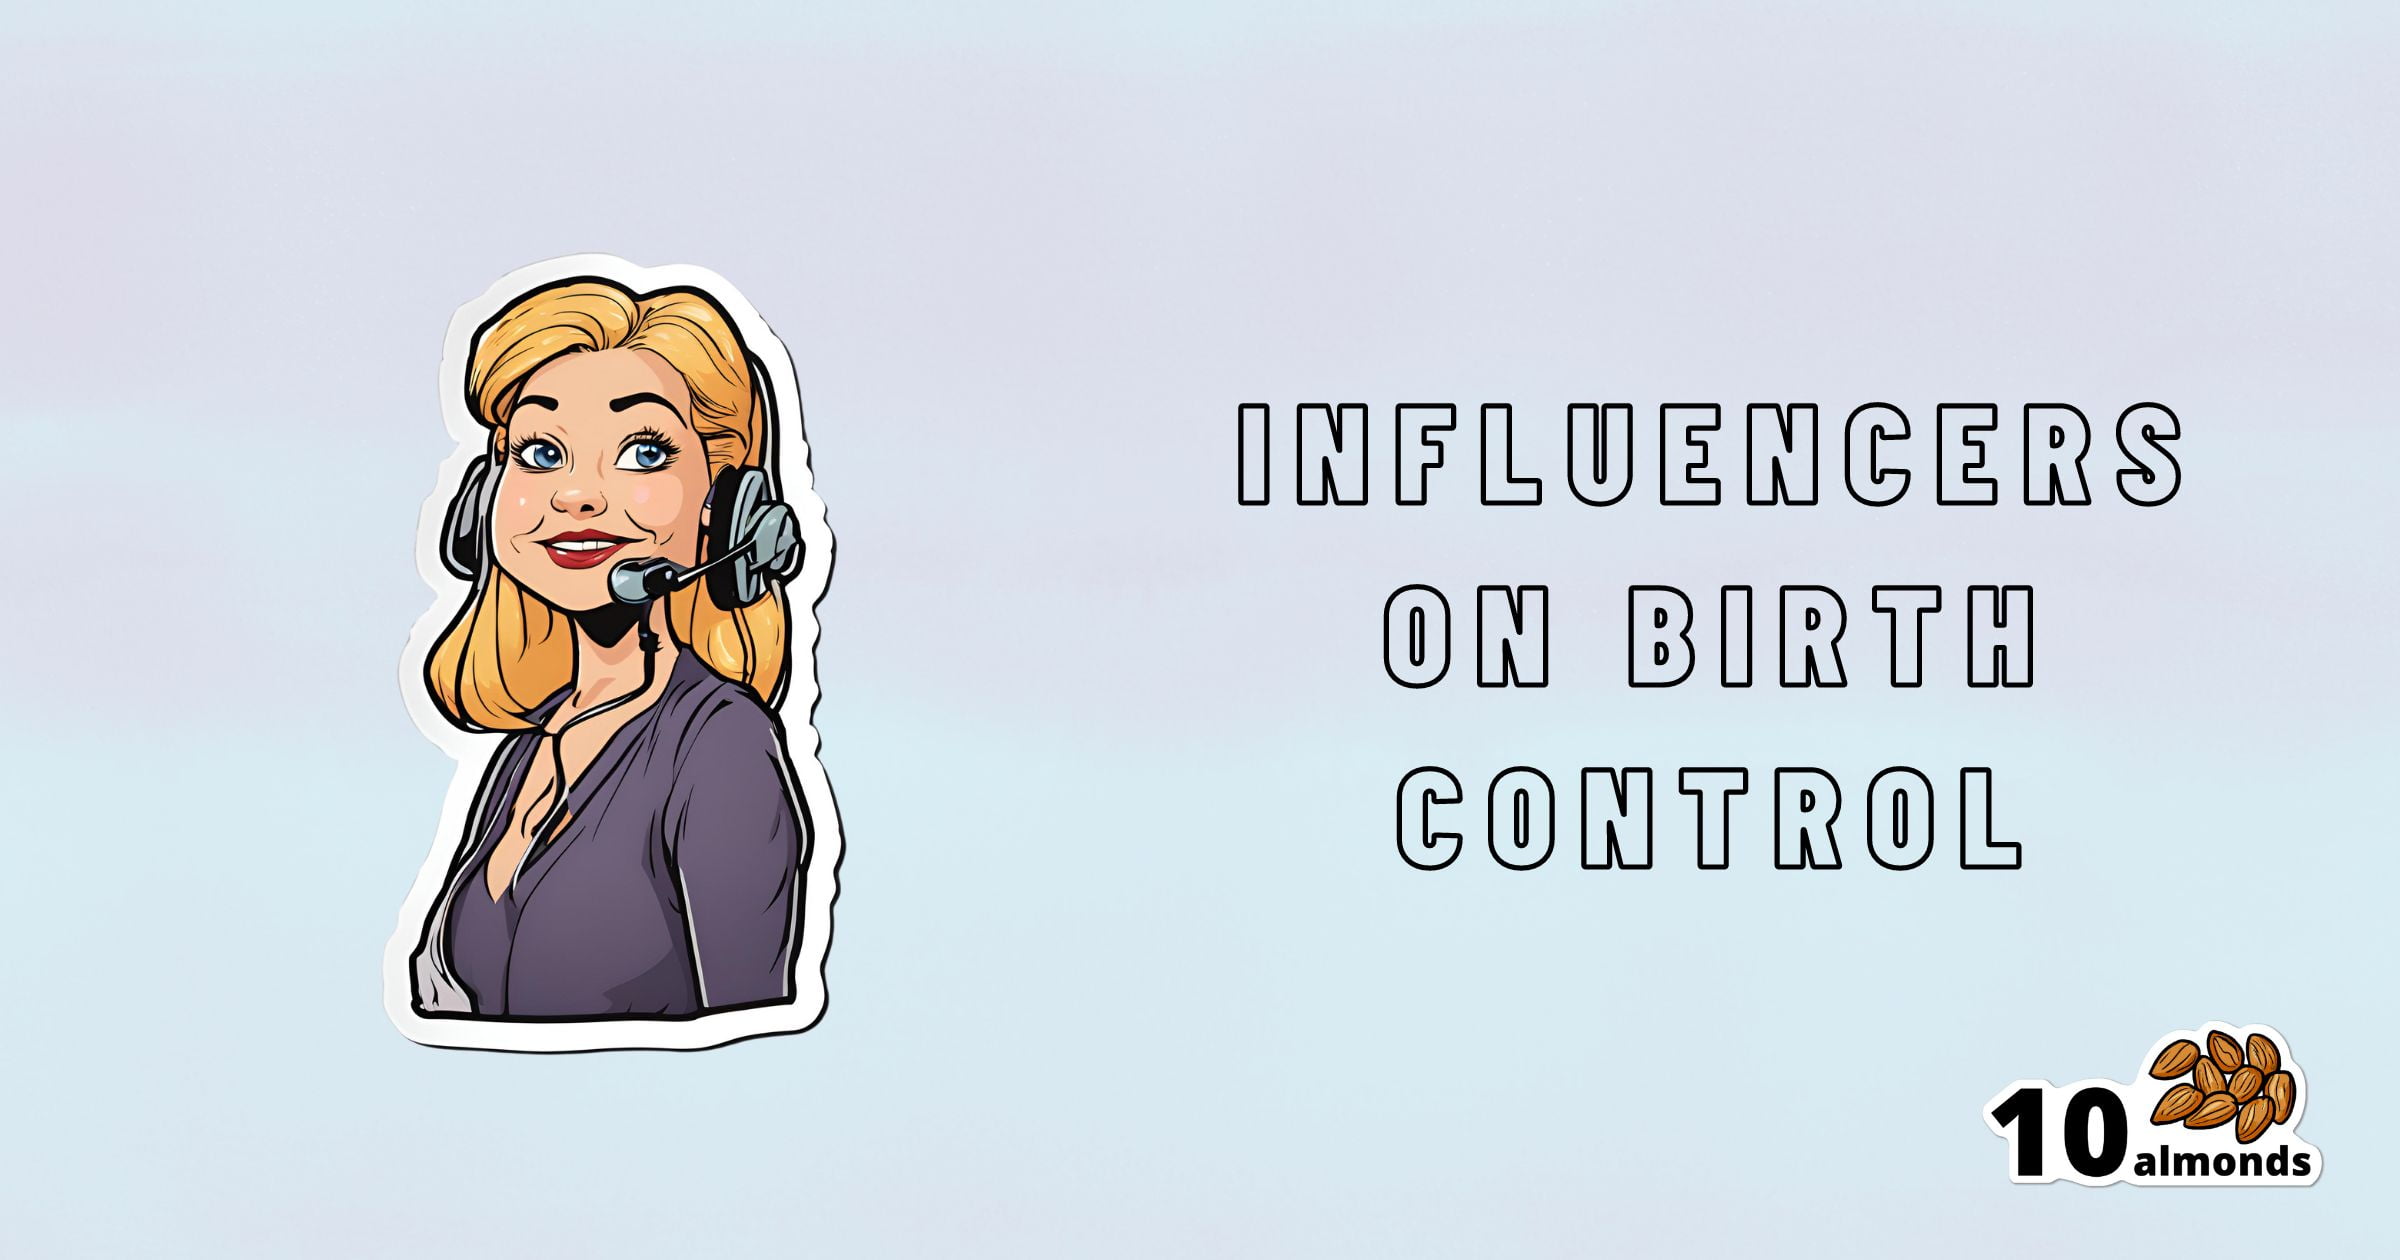 Illustration of a blonde woman wearing a headset over a light purple blouse on a pale blue background. To her right, the text reads, "Influencers on Birth Control." In the bottom right corner, there is a logo of "10 almonds," featuring the number 10 beside illustrations of almonds.